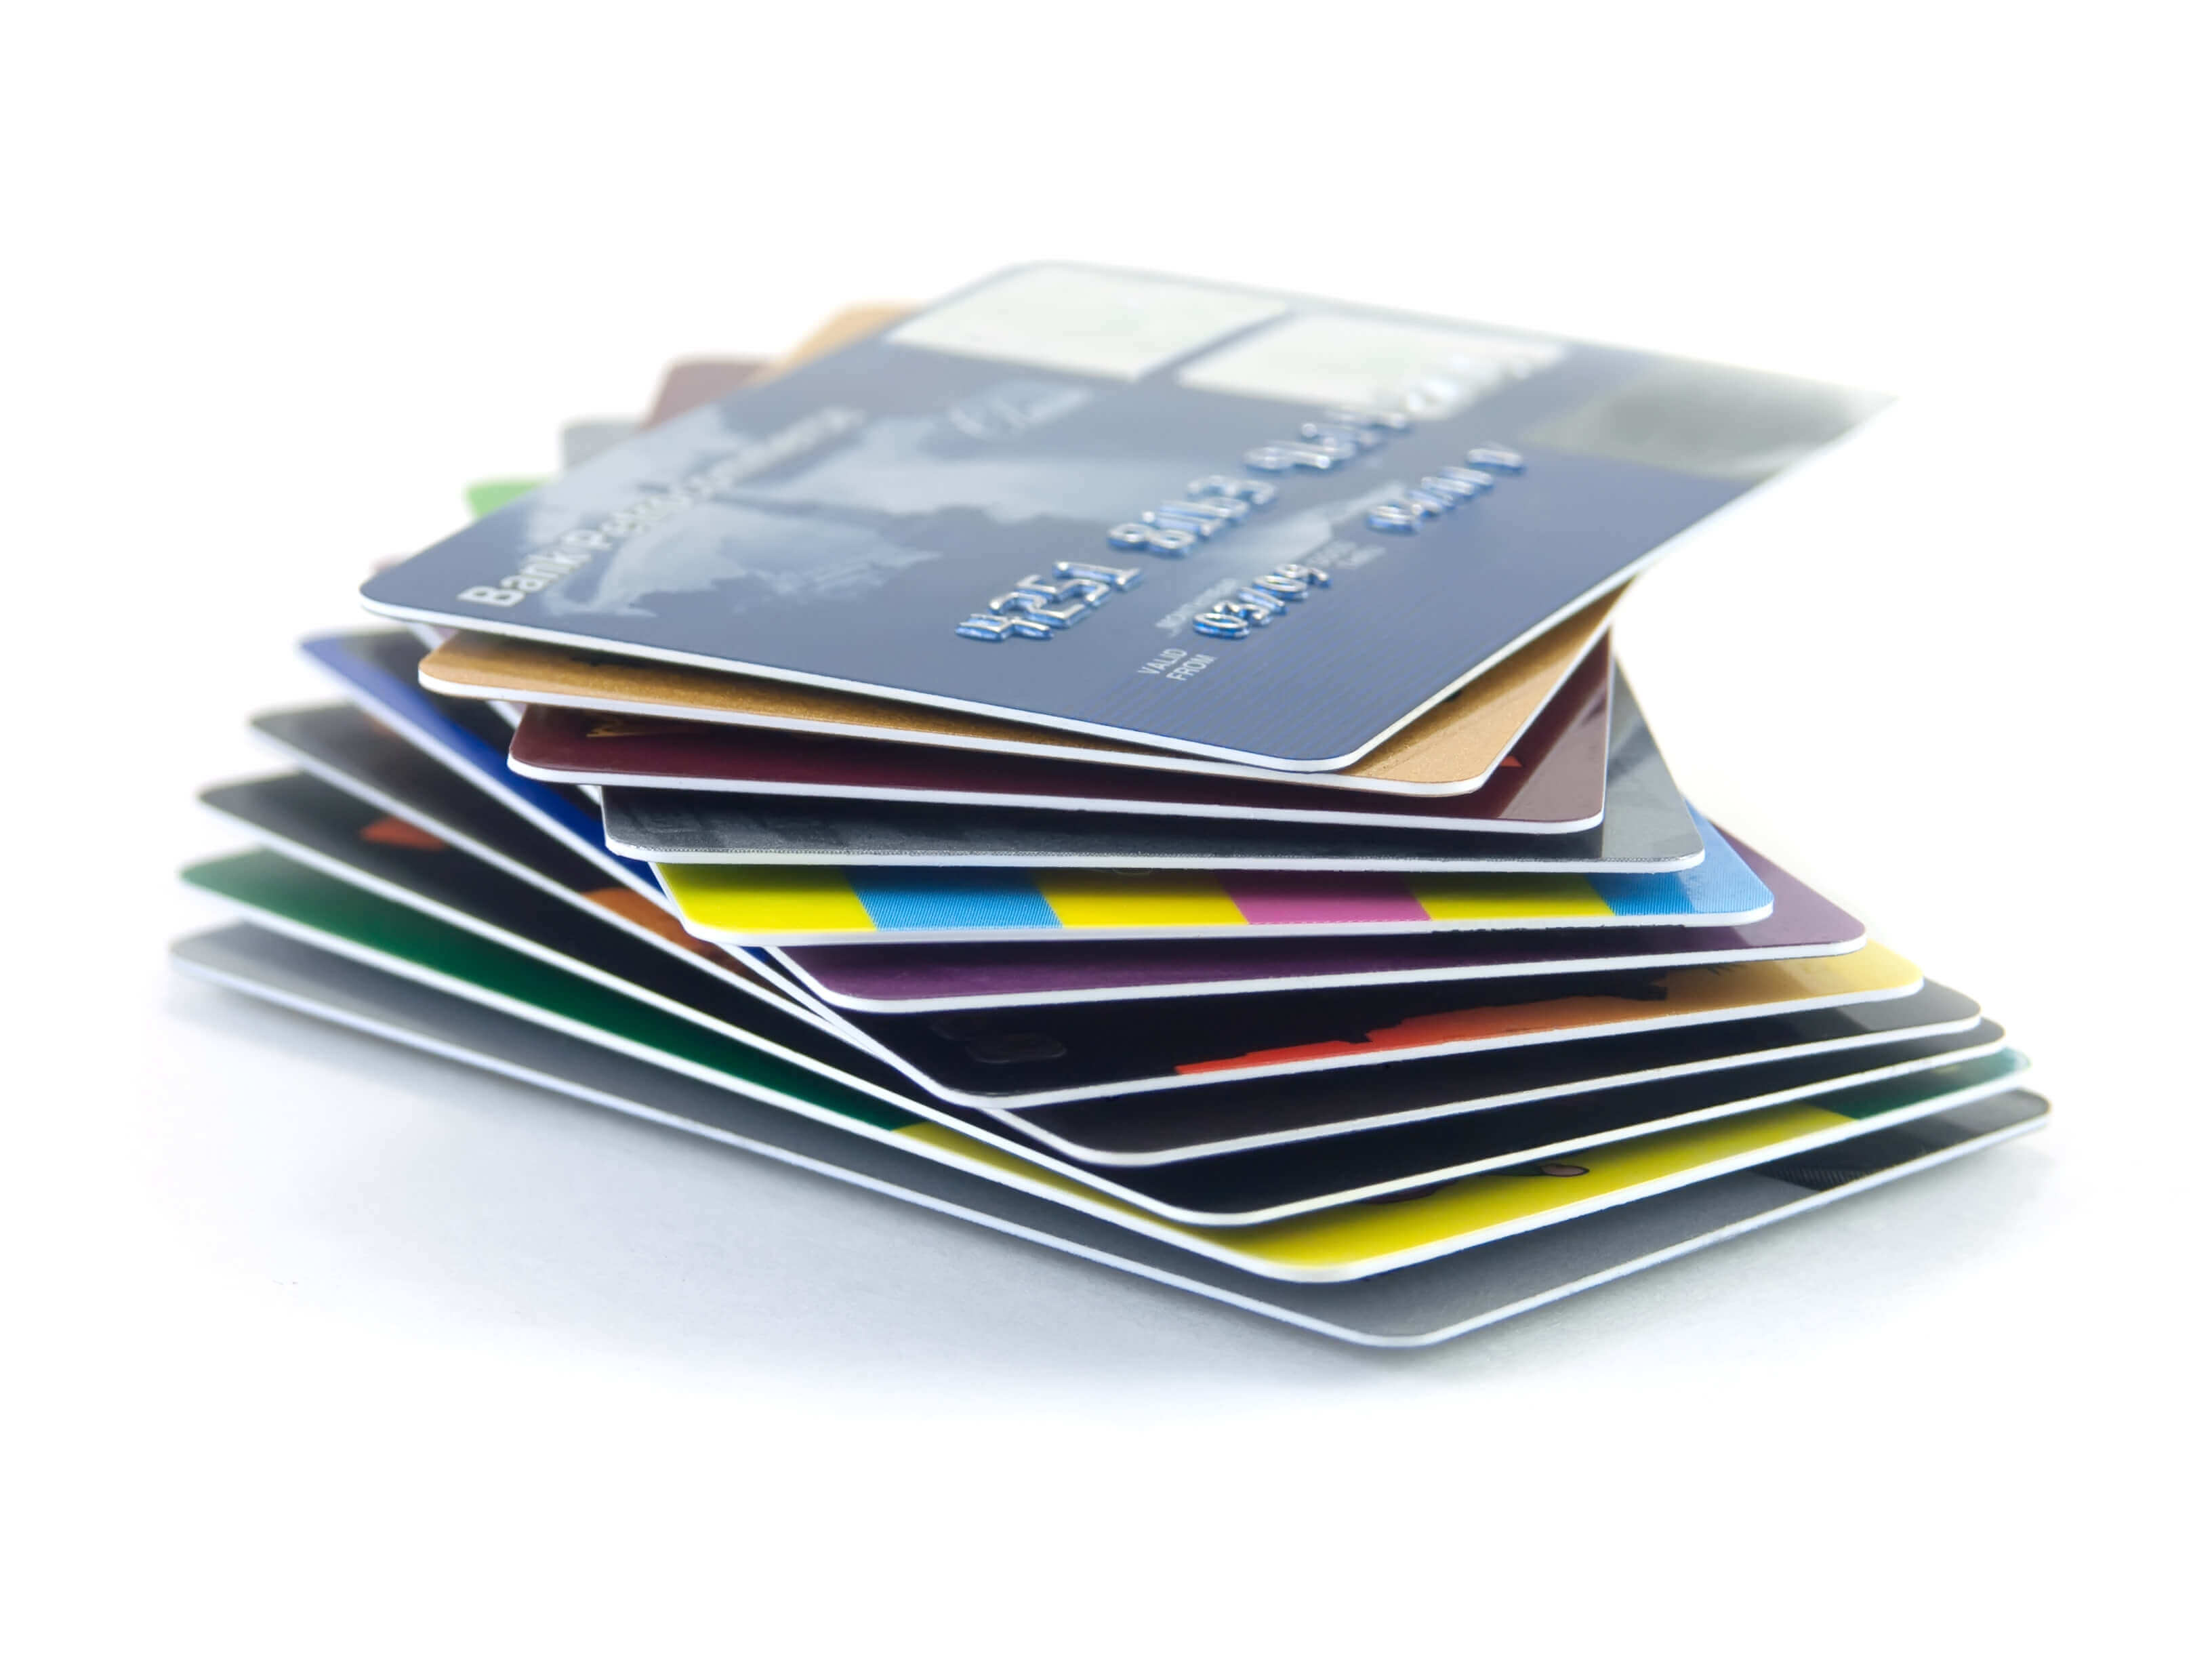 Image of a pile of credit cards